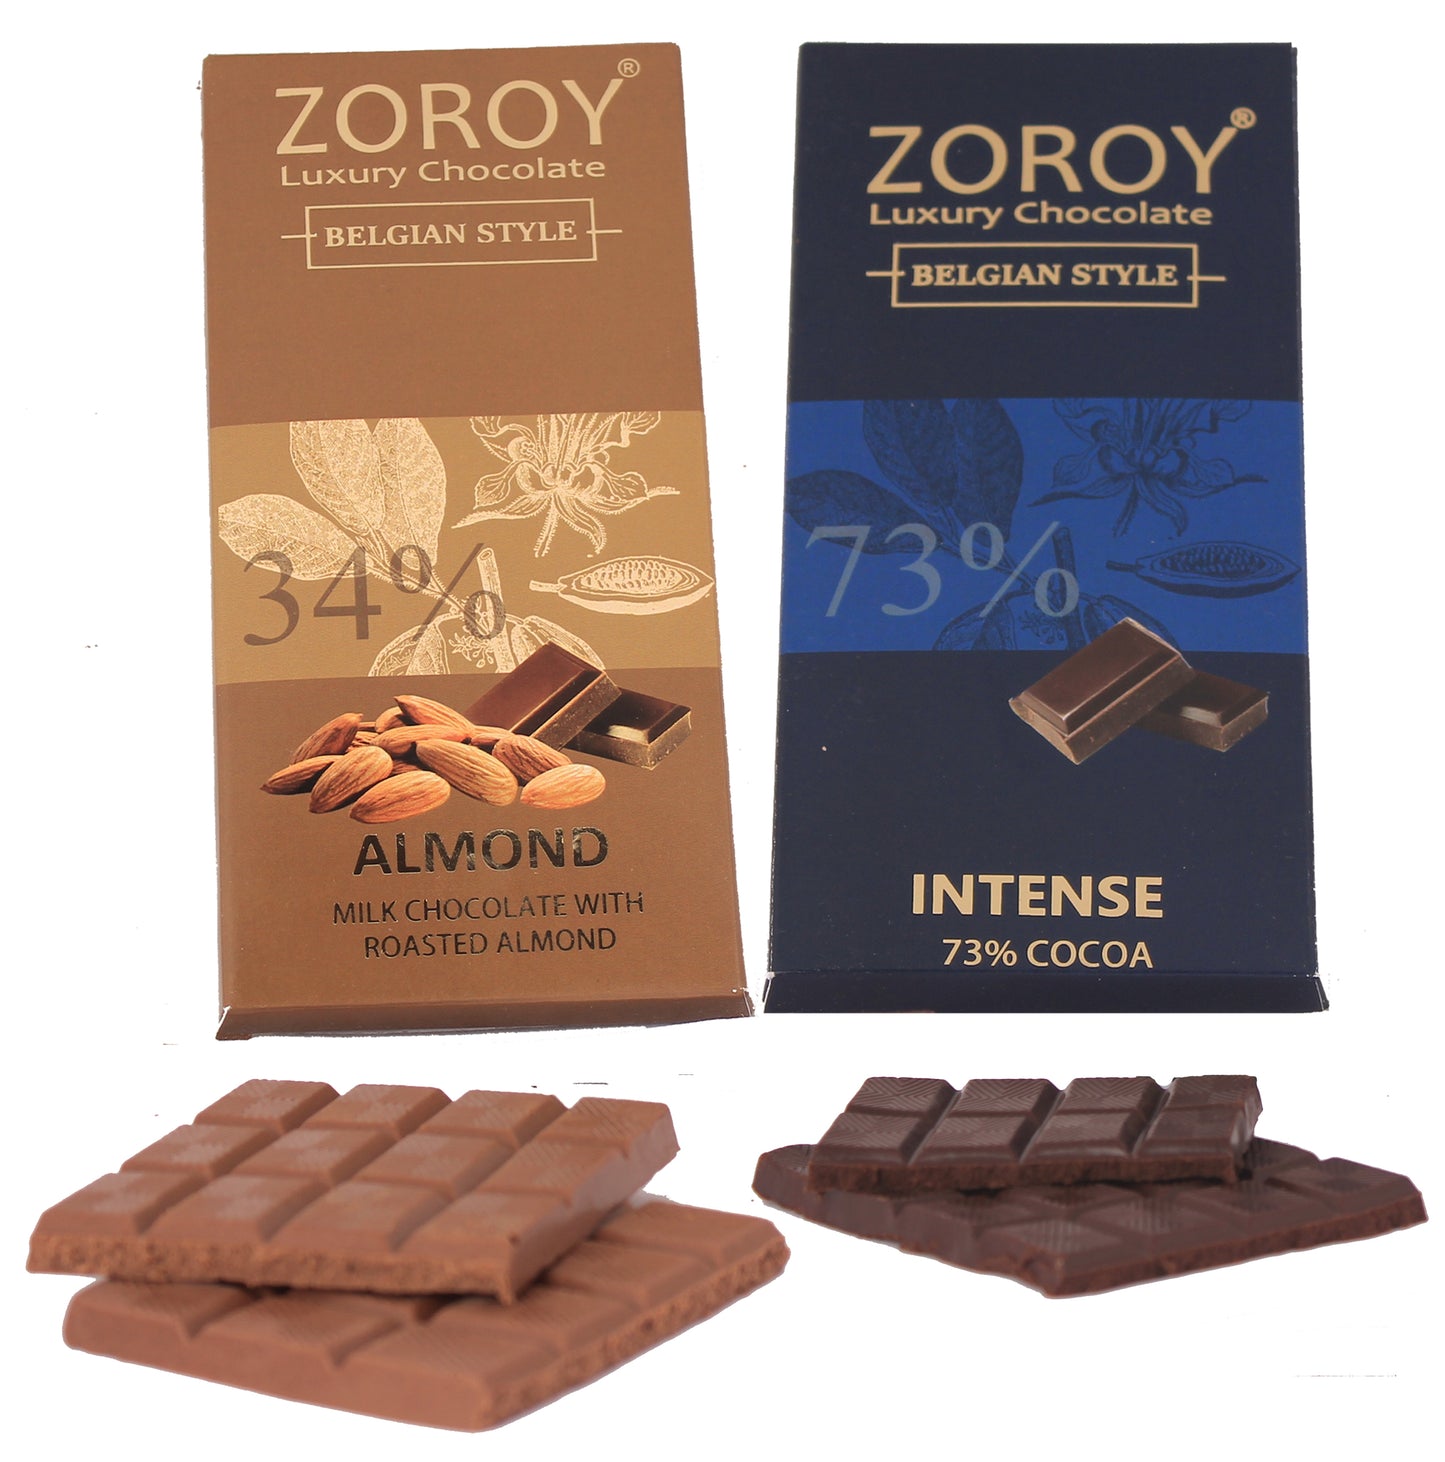 ZOROY LUXURY CHOCOLATE 100% Couverture 73% Dark chocolate bar | Milk Almond chocolate bar | Signature Belgian style chocolate |Cocoa Butter Chocolates | Cooking chocolate | Set of 2 | 100 grams each